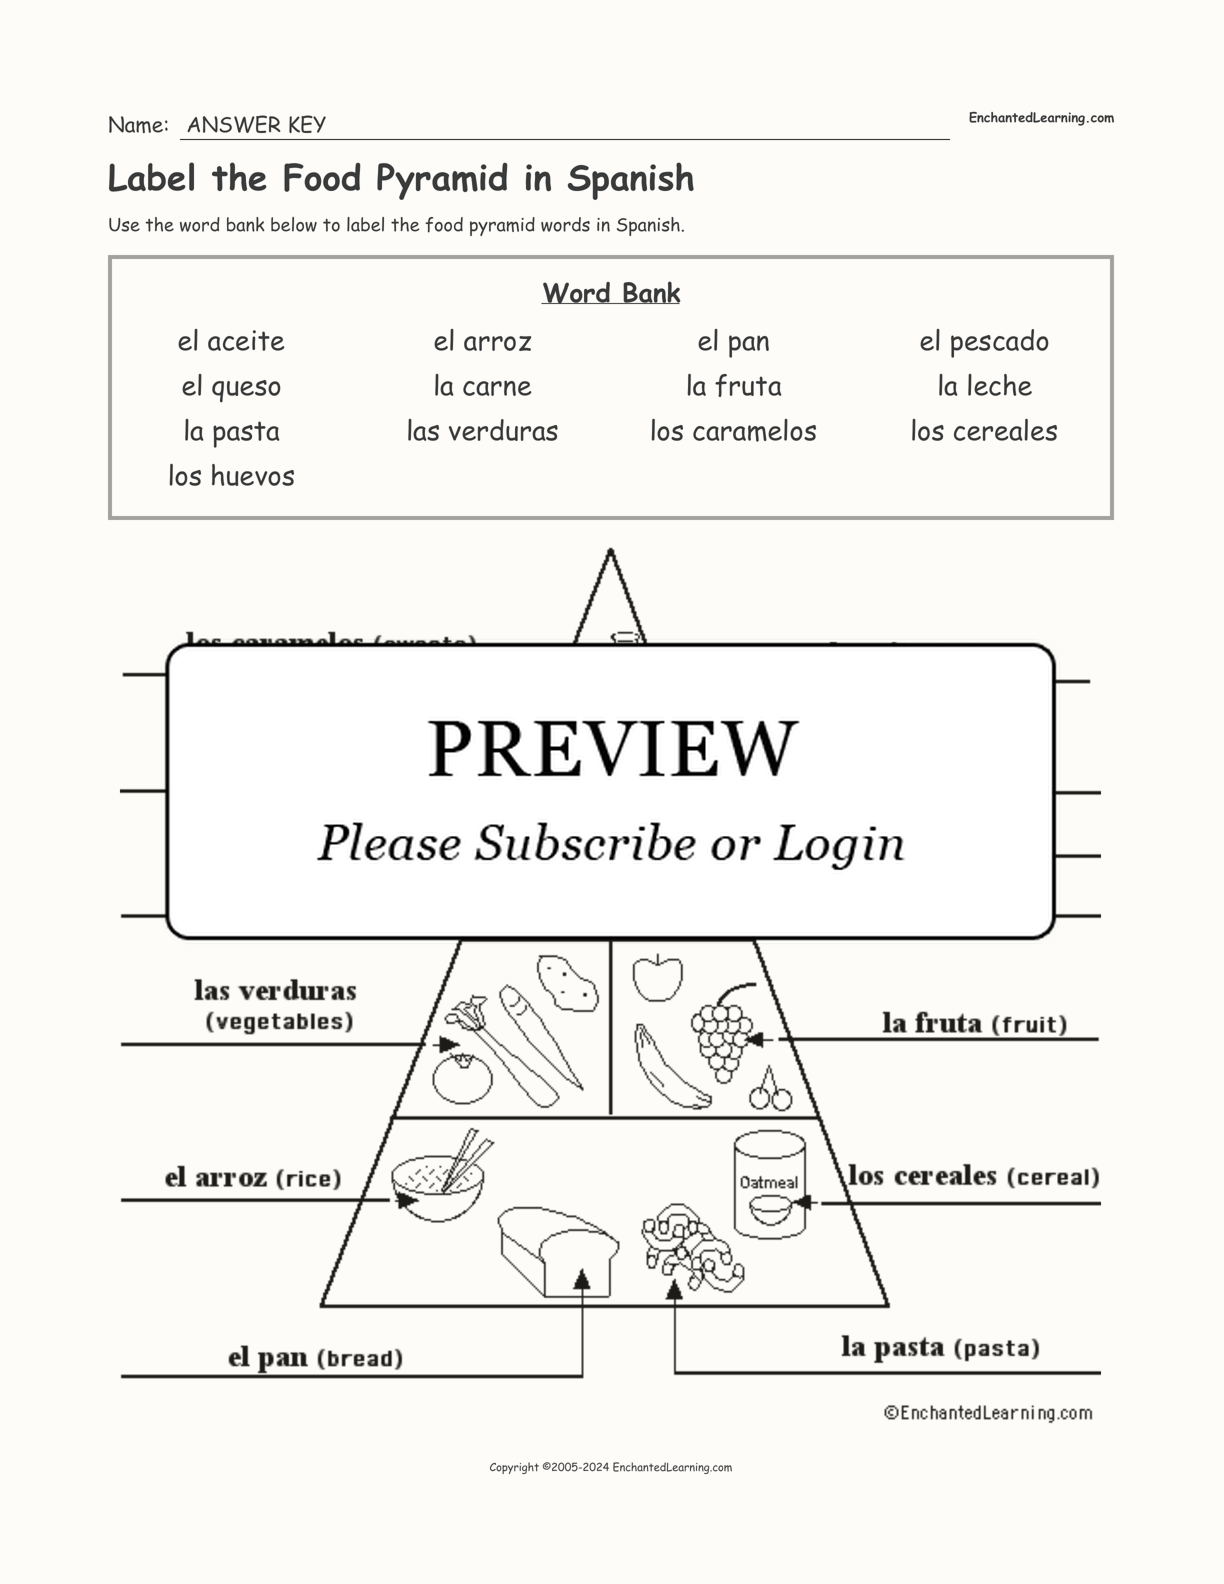 Label the Food Pyramid in Spanish interactive worksheet page 2